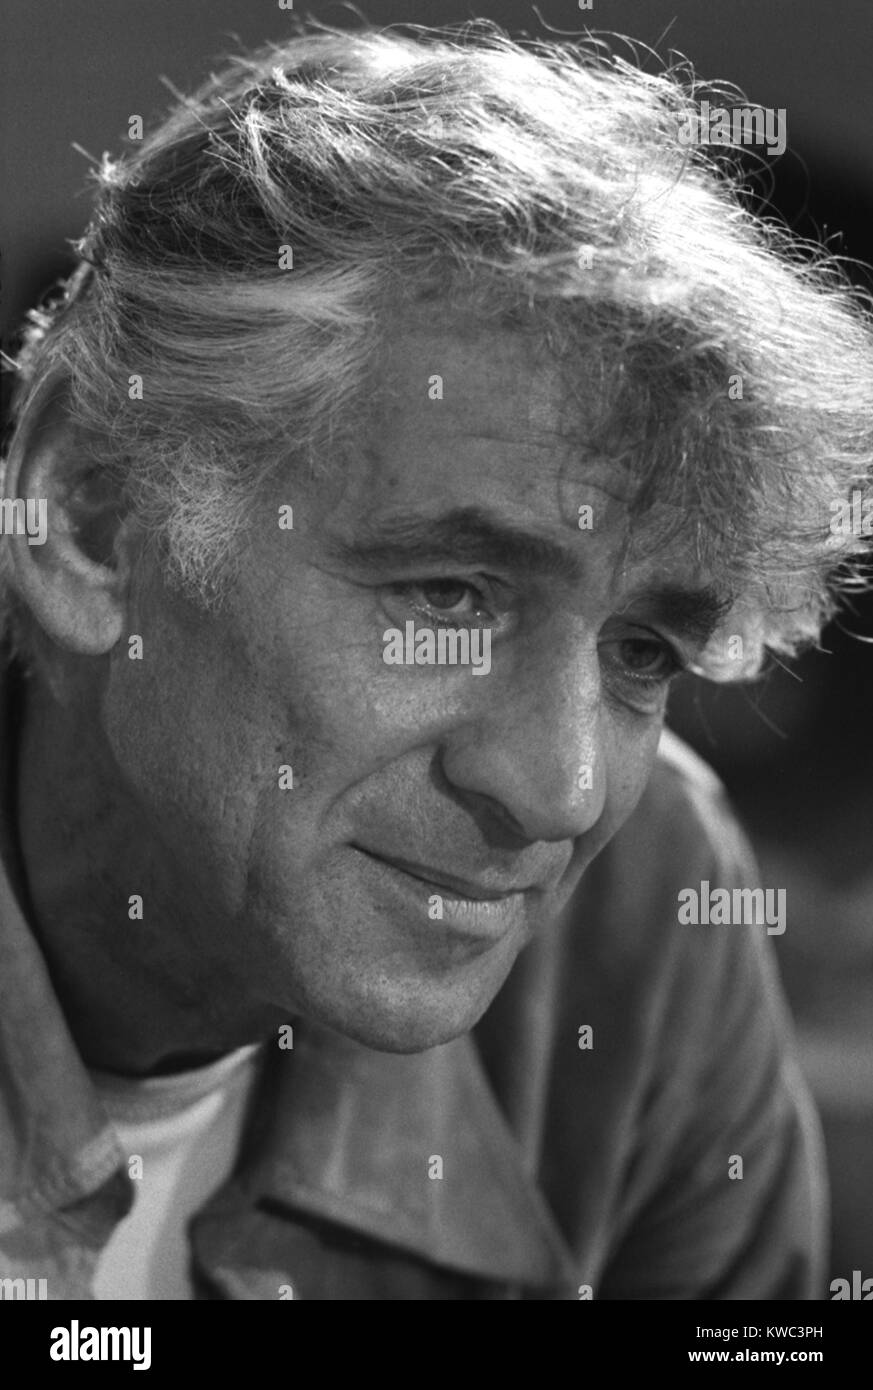 Leonard Bernstein listening to his 'Mass' during a rehearsal, Sept. 1, 1971. Commissioned by Jacqueline Kennedy, it premiered on Sept. 8, 1971 at the opening of the John F. Kennedy Center for the Performing Arts in Washington, D.C. (BSLOC 2015 14 165) Stock Photo